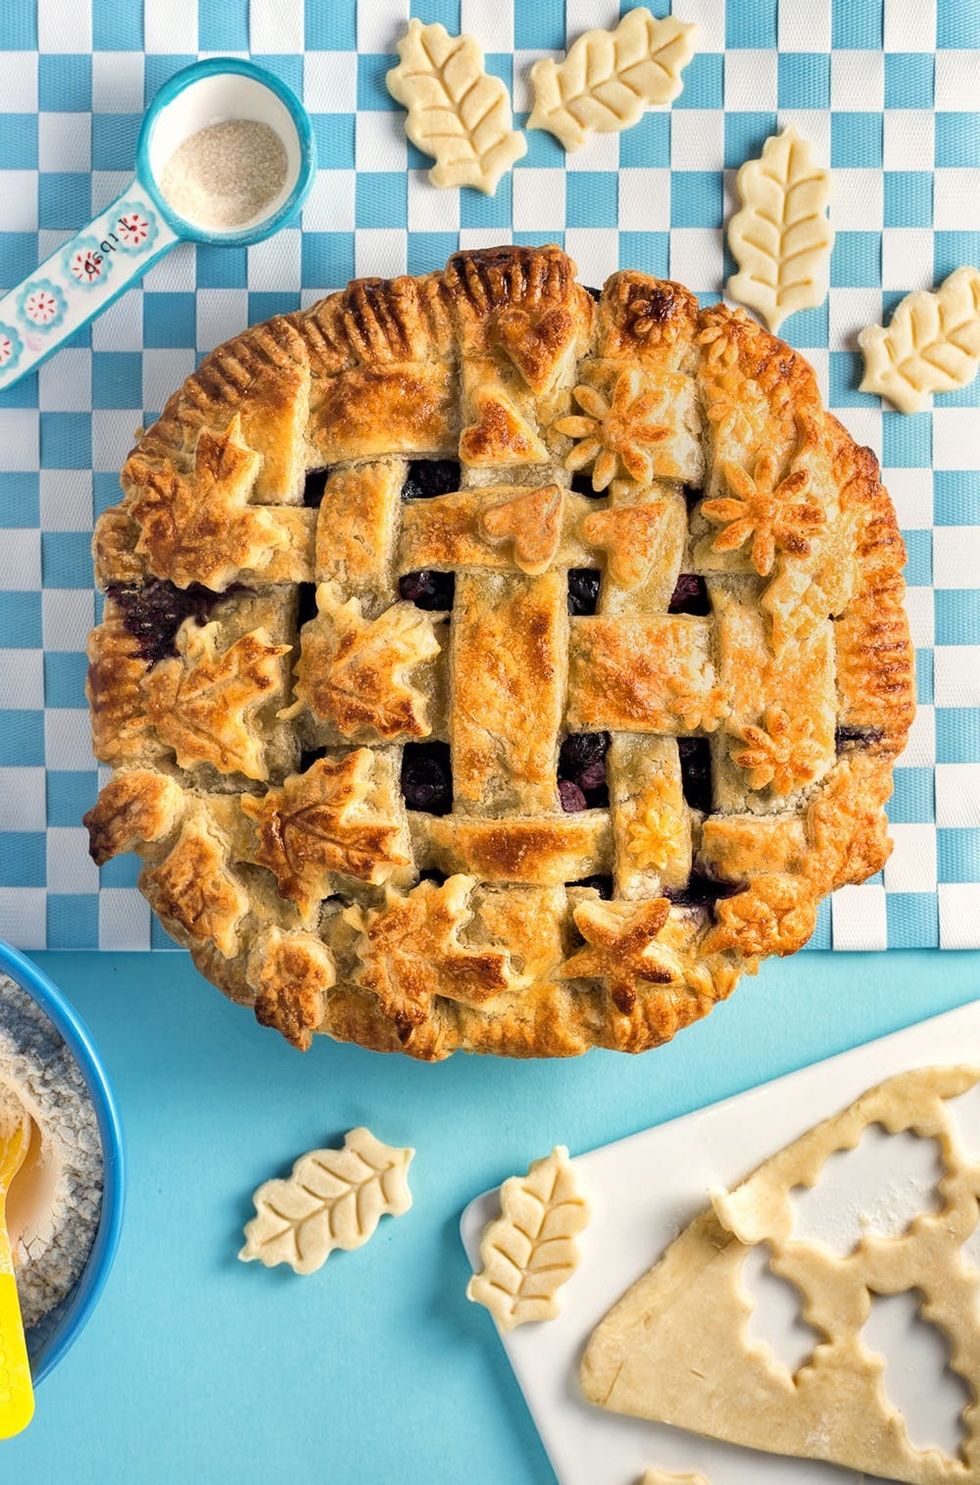 Celebrate Pie Day with this classic blueberry pie